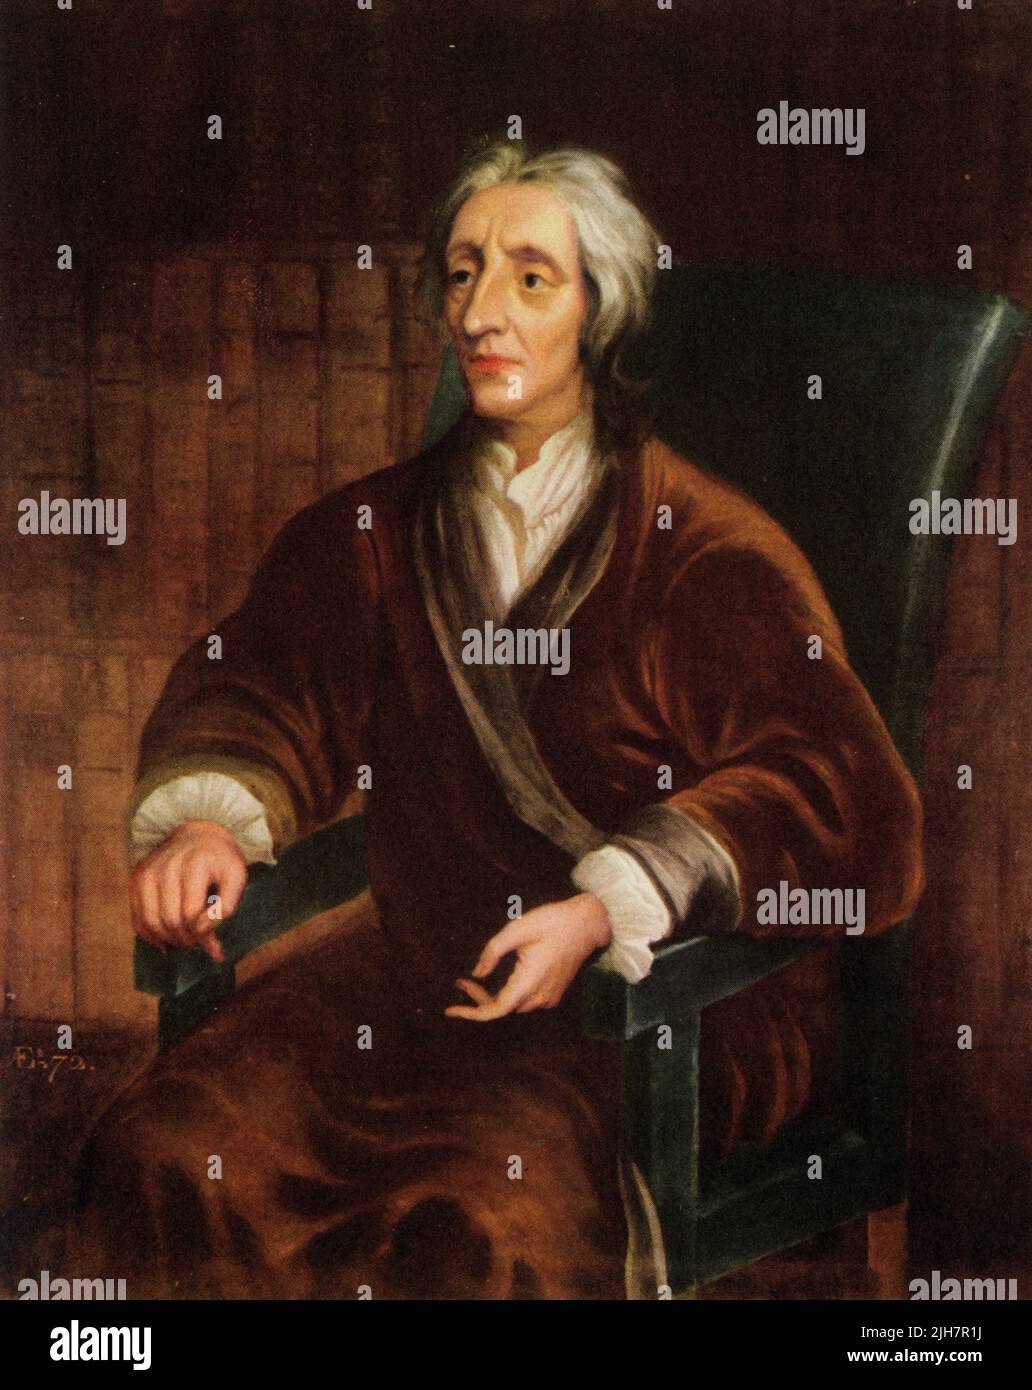 John Locke (1632-1704). After Sir Godfrey Kneller (1646-1723). English philosopher, physician and influential Enlightenment thinker. He is commonly known as the 'Father of Liberalism'. Stock Photo